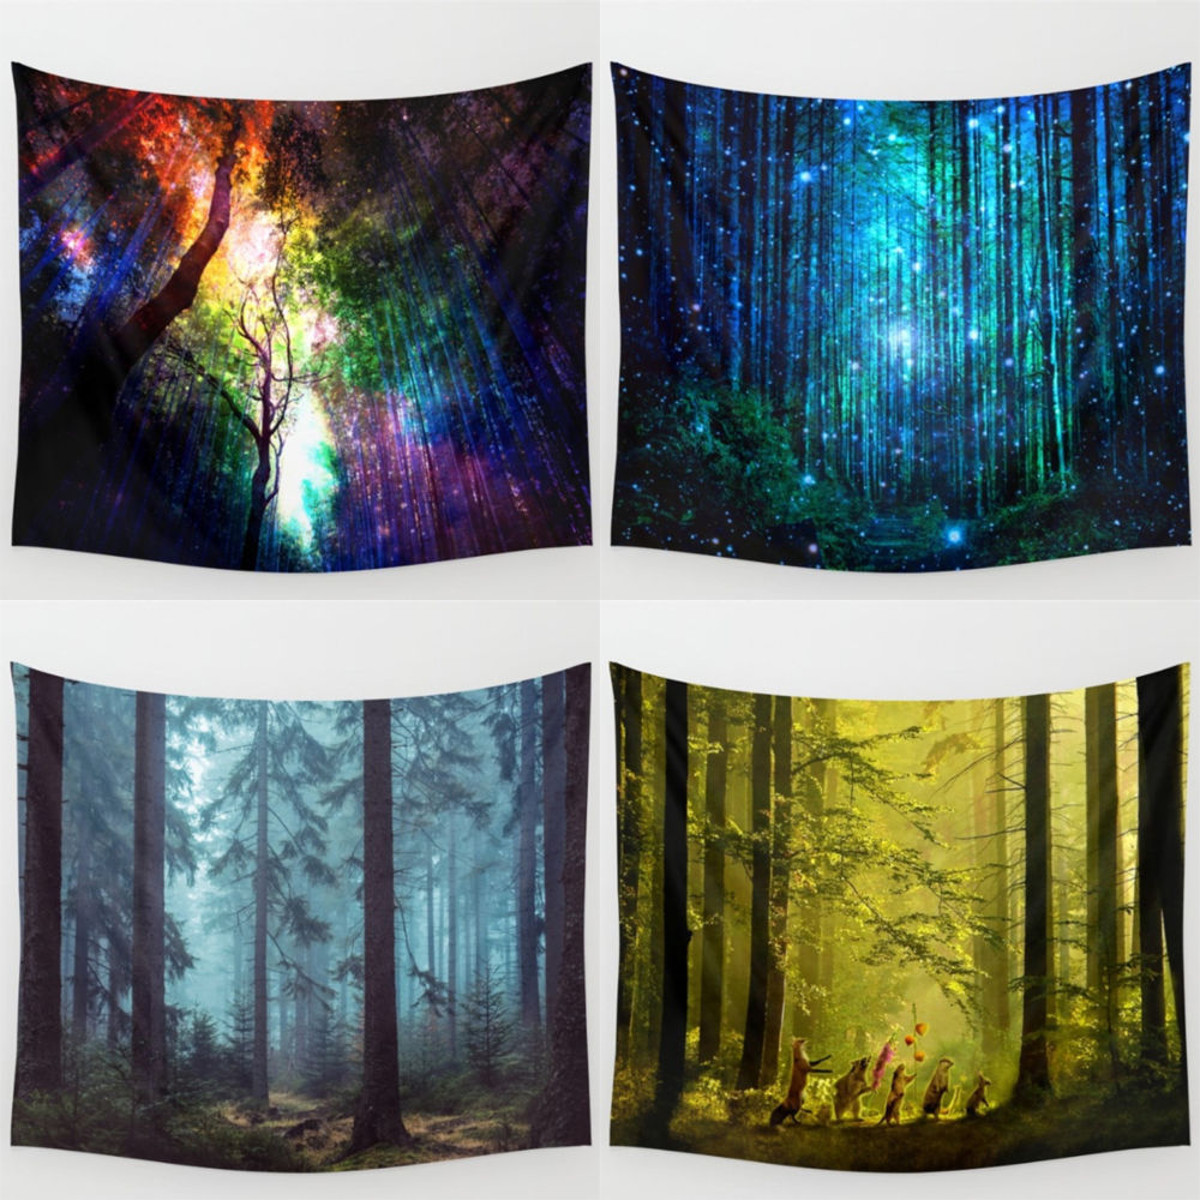 

Forest Tree Indian Tapestry Beach Towel Bedspread Blanket Wall Hanging Throw Mat Home Decor